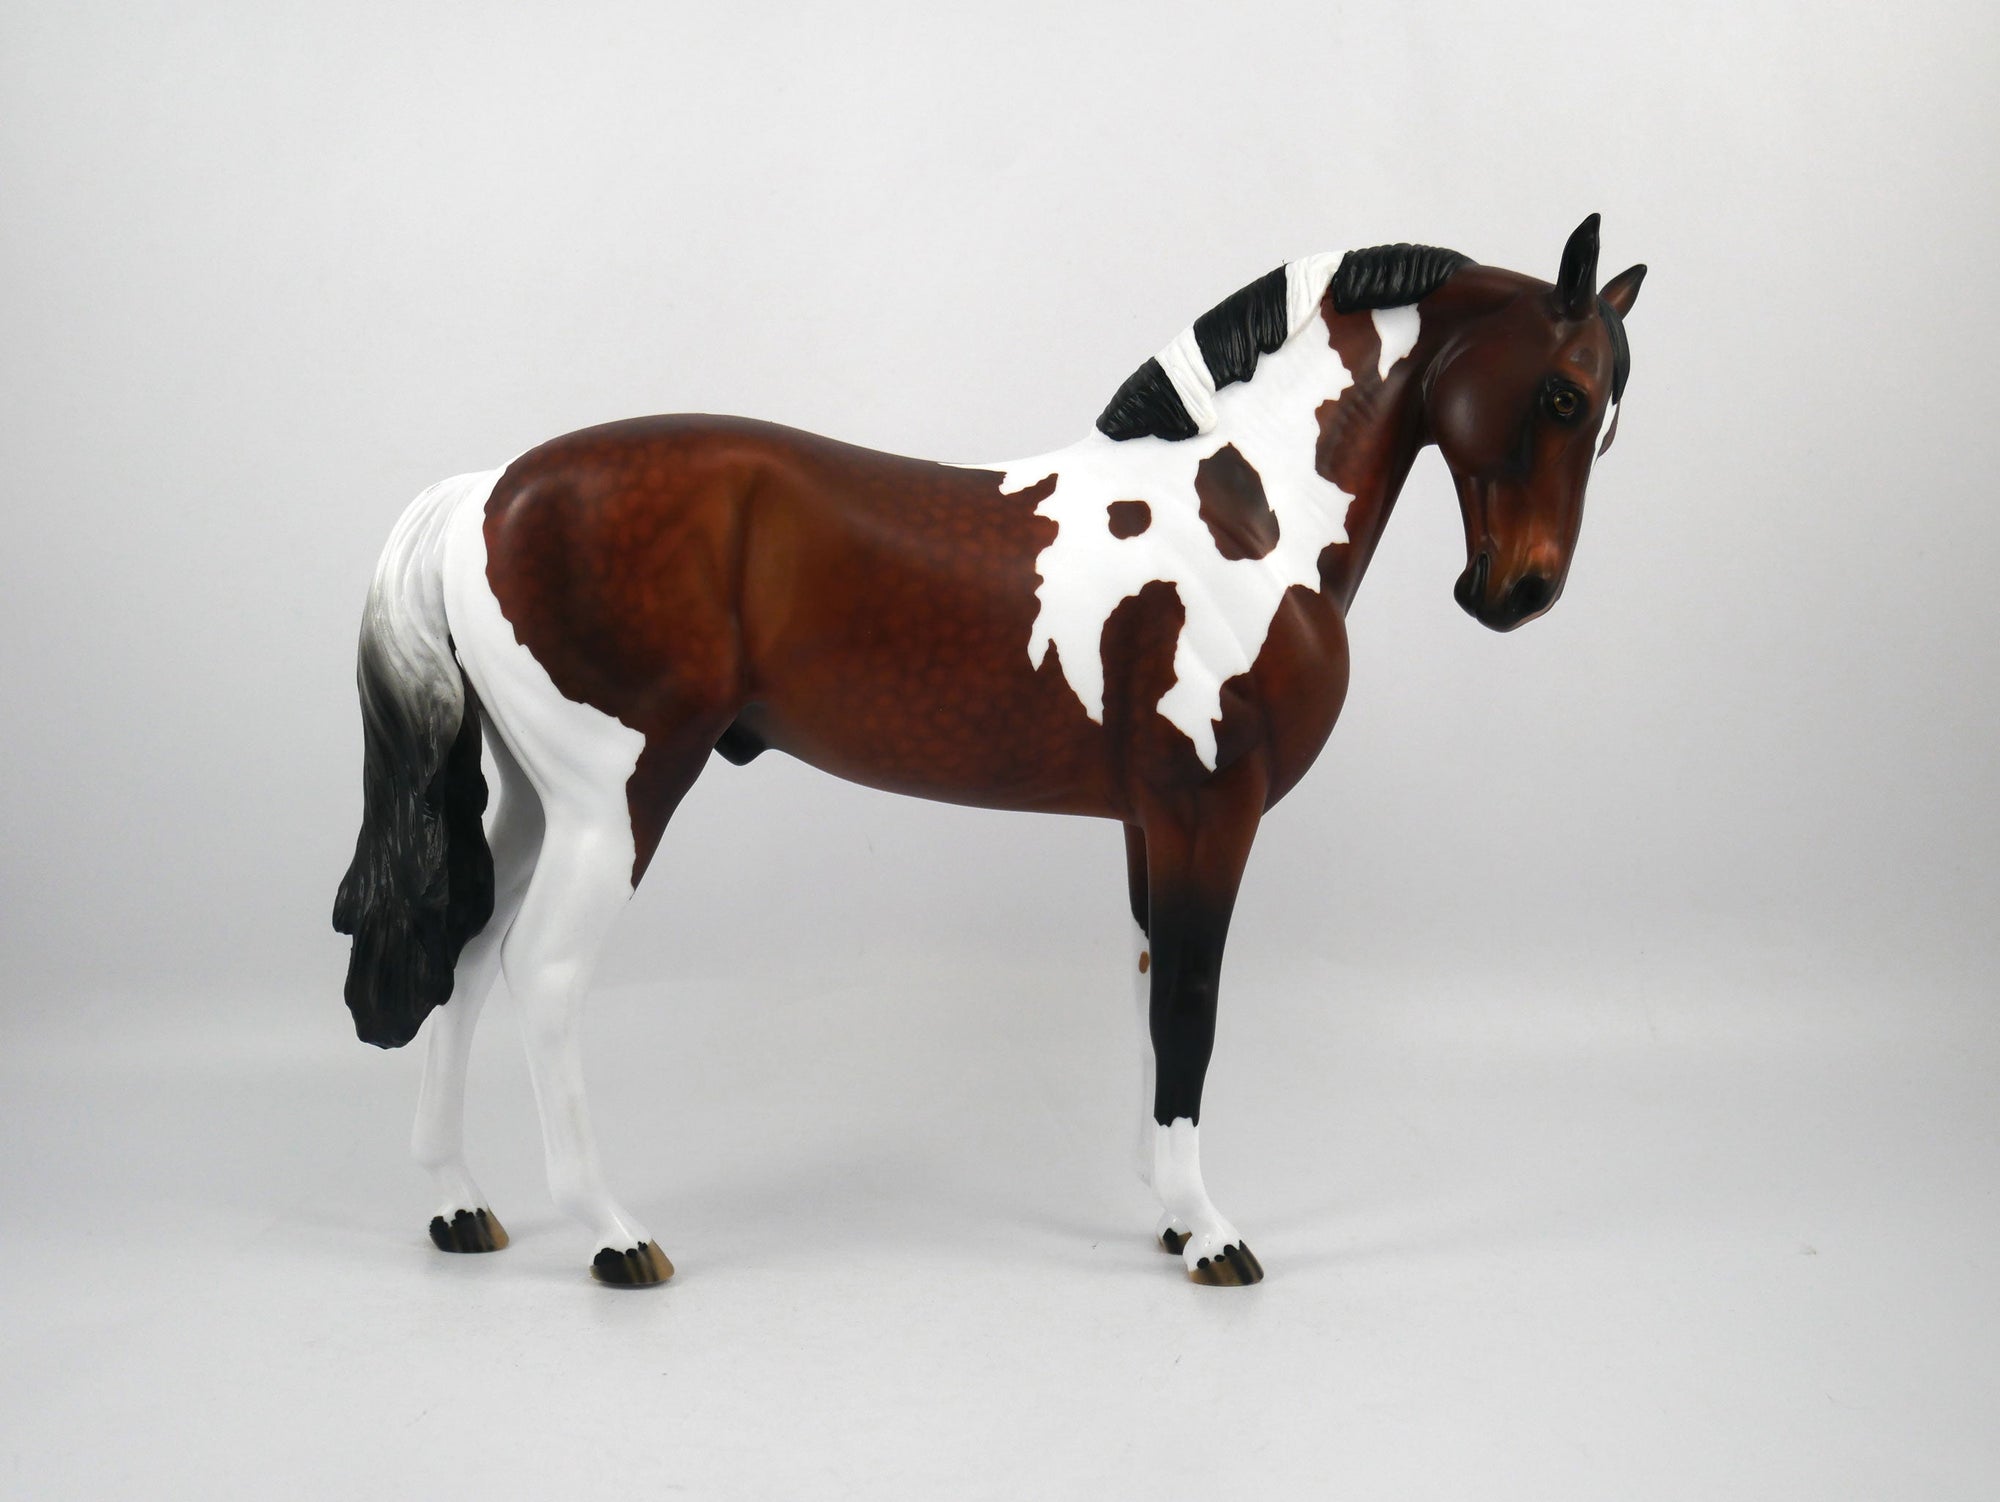 Buccaneer-OOAK Dapple Bay Paint Andalusian Painted by Audrey Dixon SB21